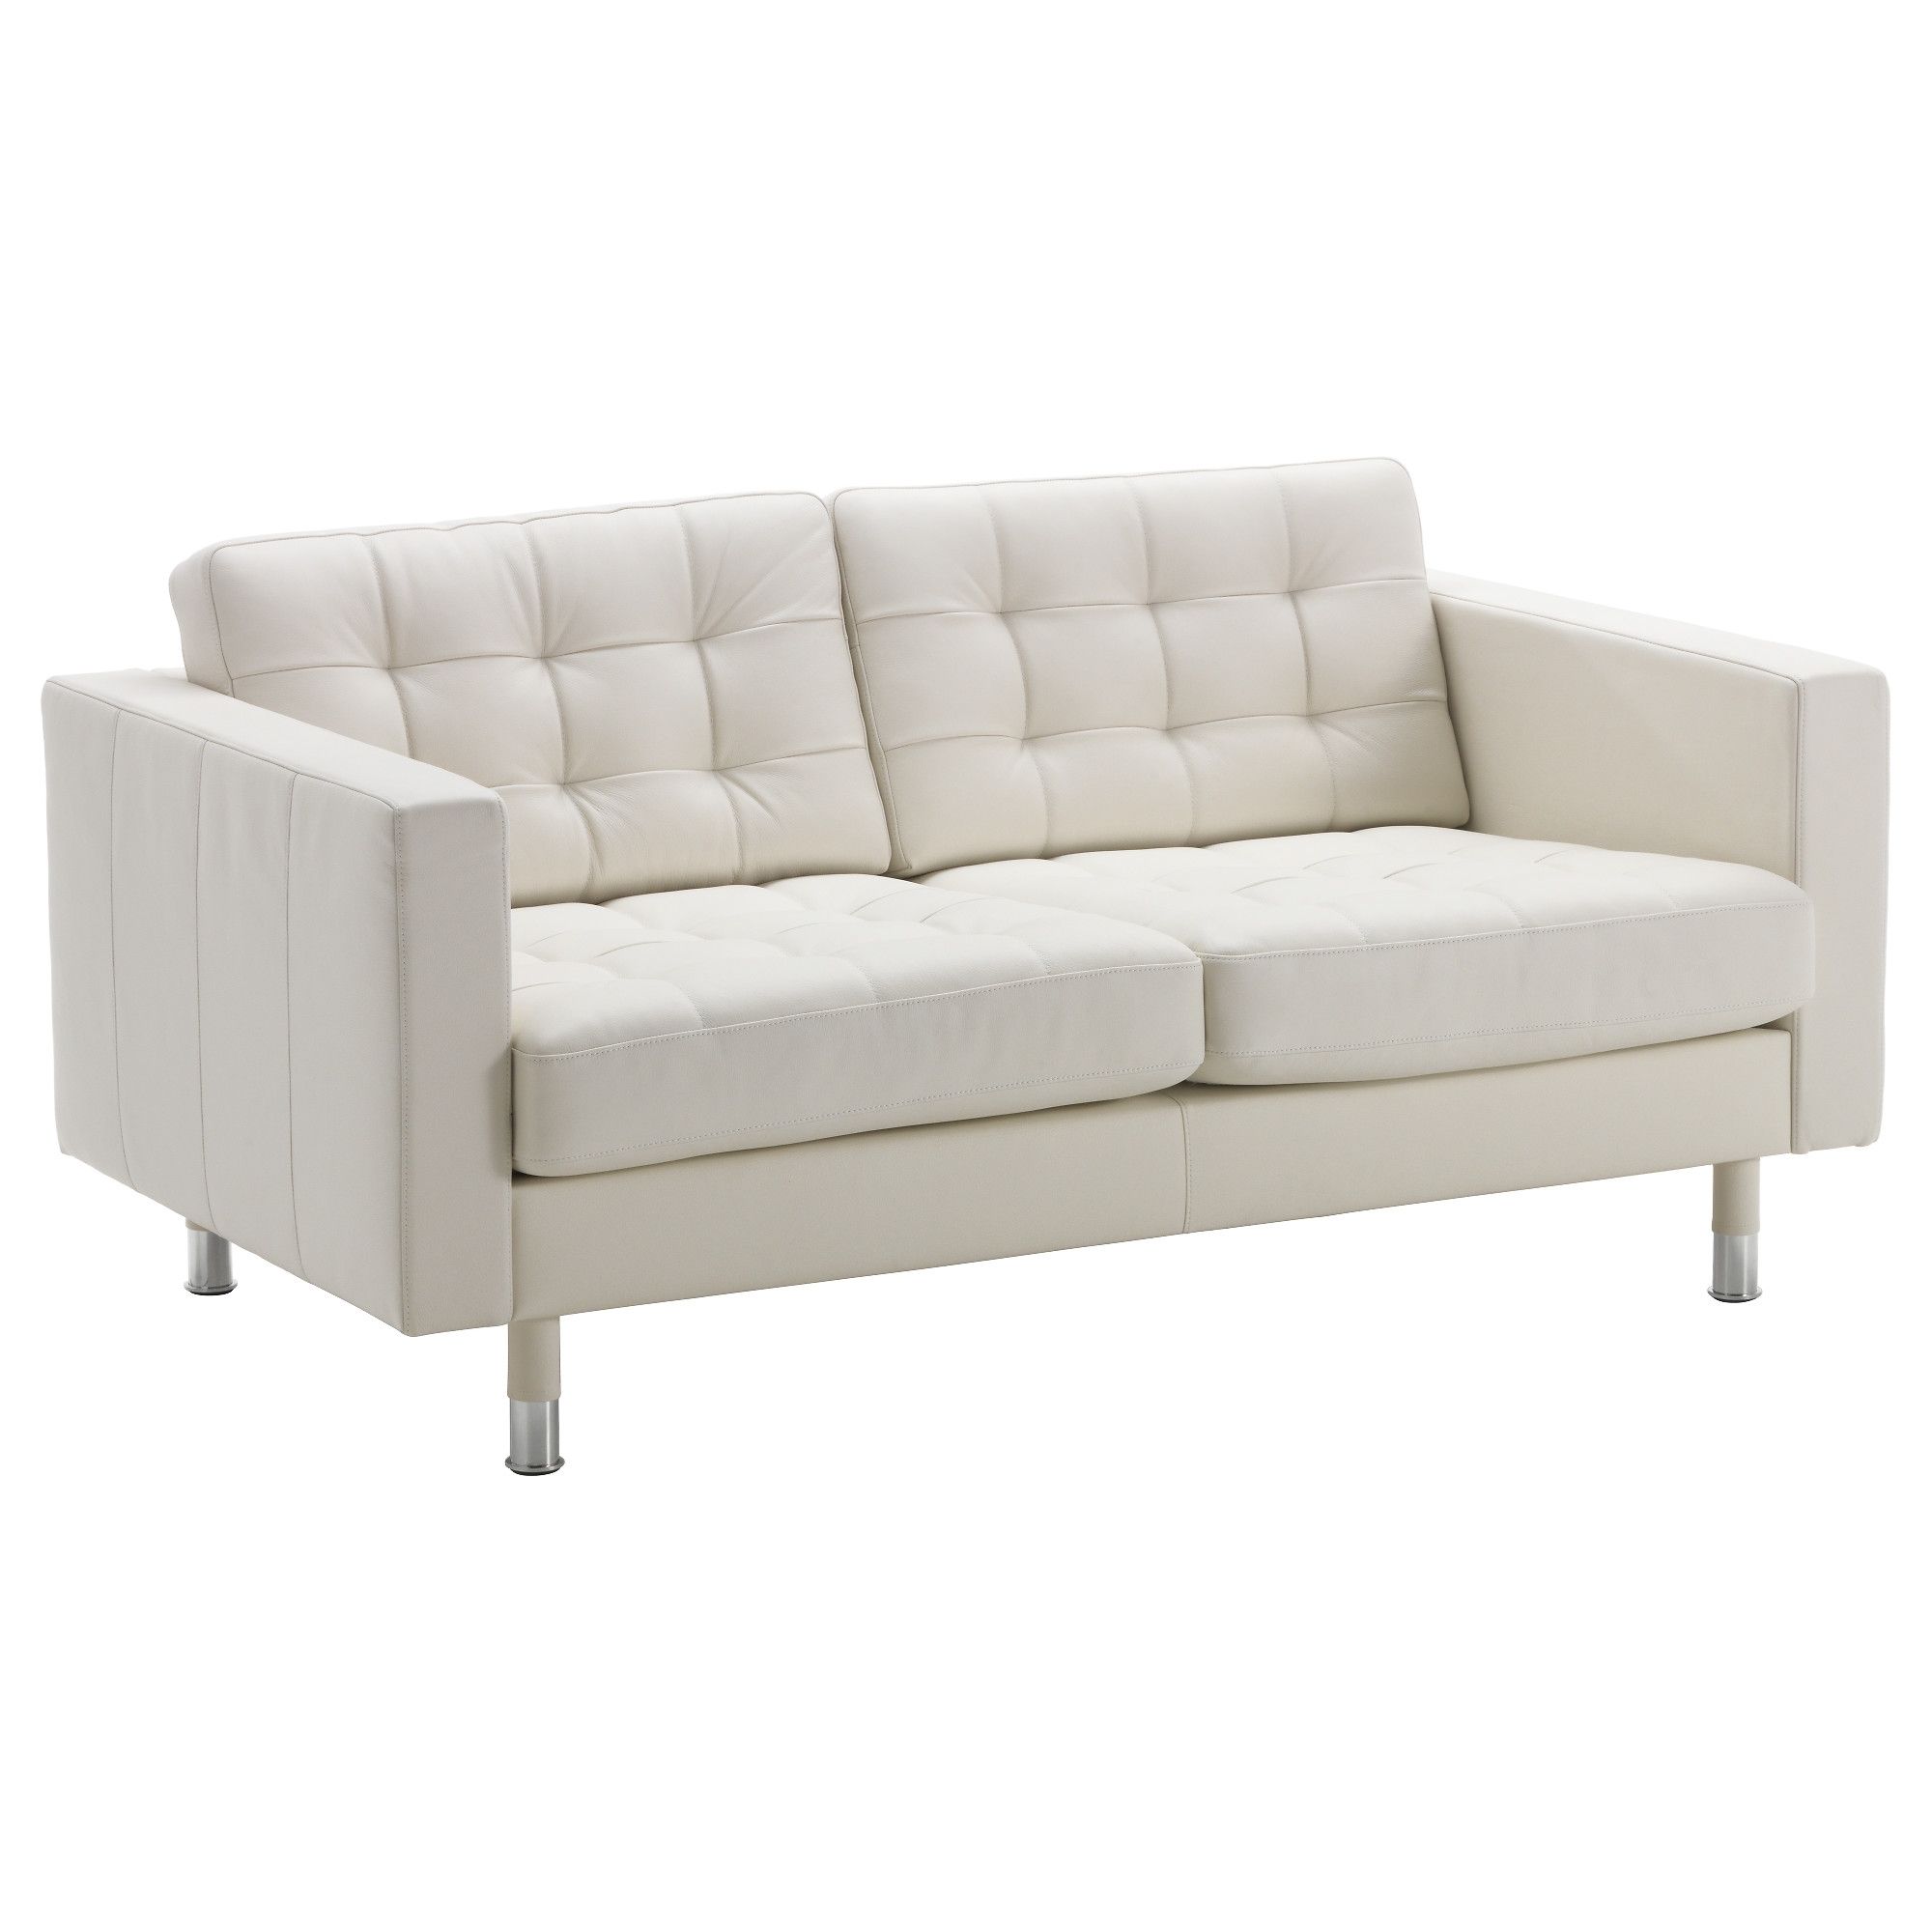 Most Up To Date Landskrona Two Seat Sofa Grann/bomstad White/metal – Ikea In Ikea Two Seater Sofas (View 7 of 15)